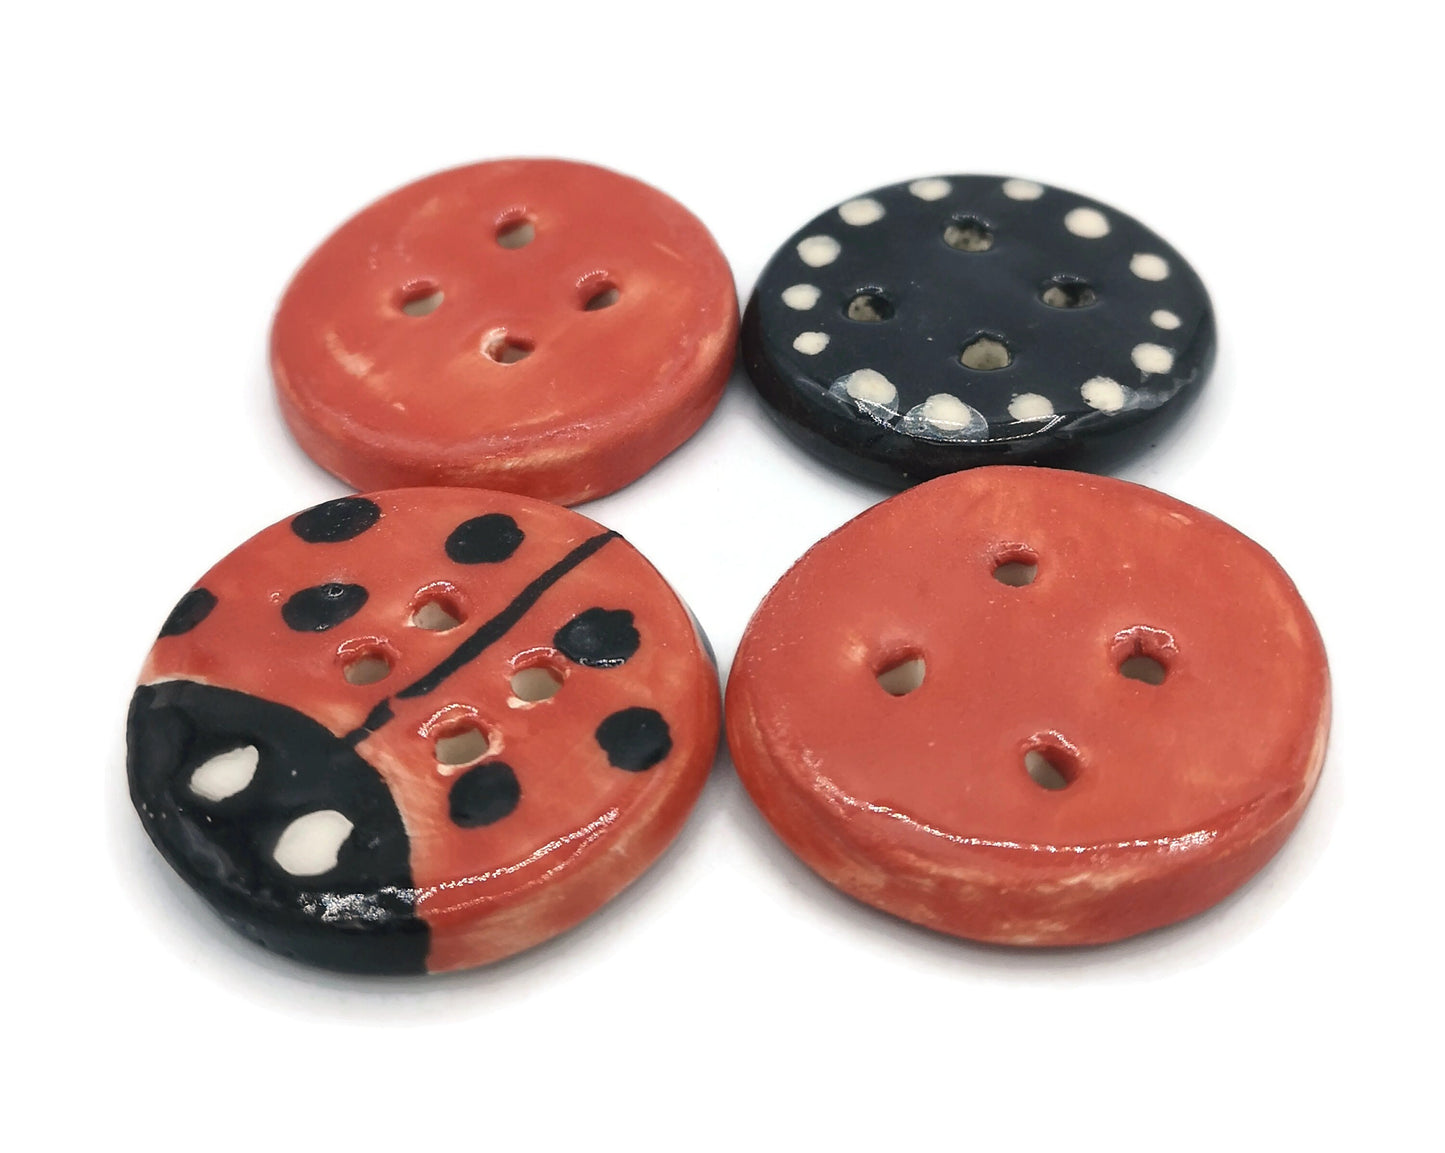 Decorative Buttons Handmade Ceramics, Set Of 4 Round Shape Red Ladybug Buttons Cute, Best Sellers 2022 Extra Large Buttons, Big Buttons - Ceramica Ana Rafael